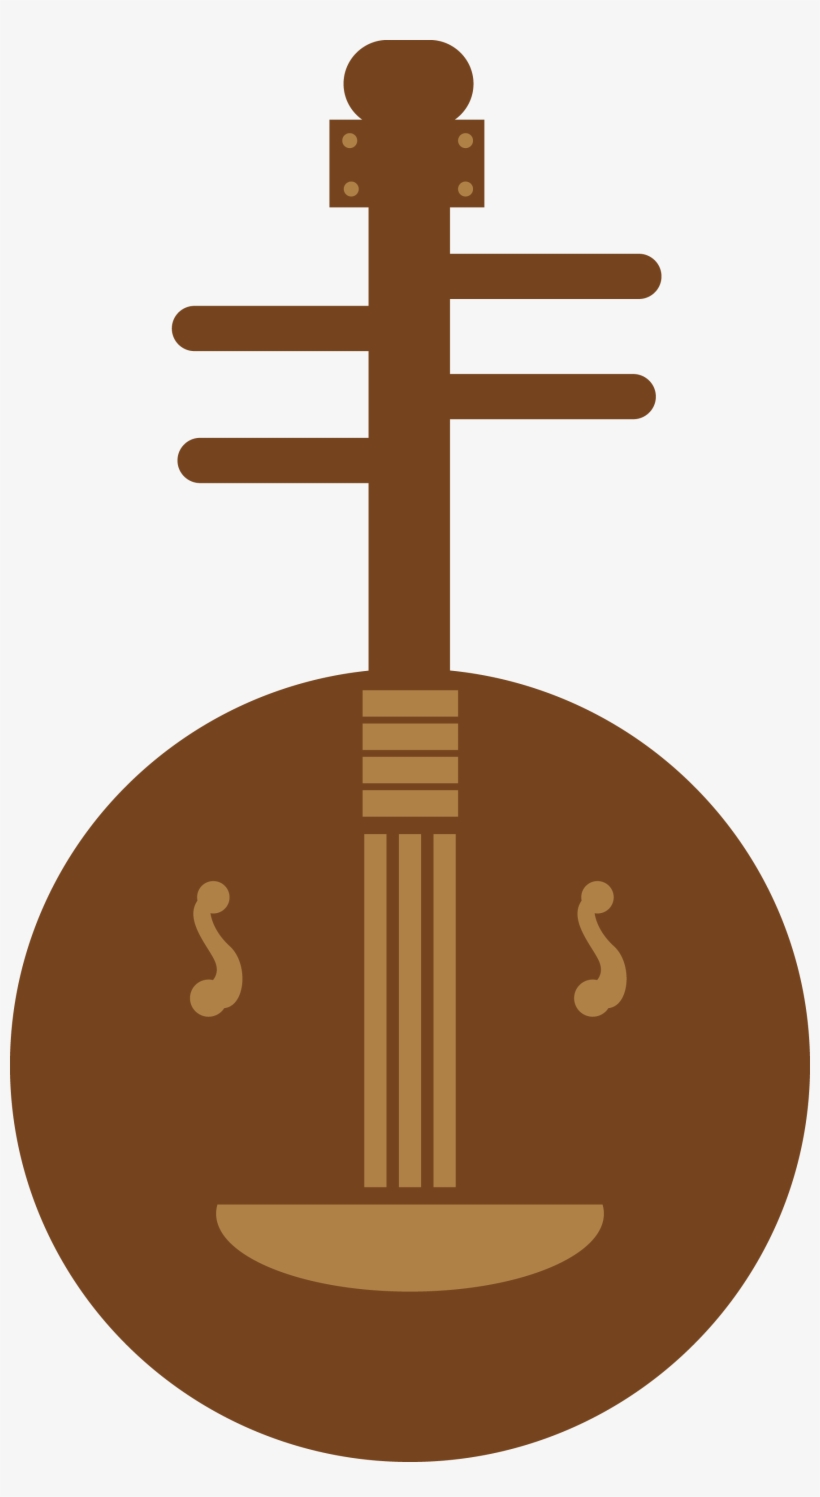 Clip Transparent Yueqin Musical Instrument Silhouette - Musical Instrument, transparent png #5945762